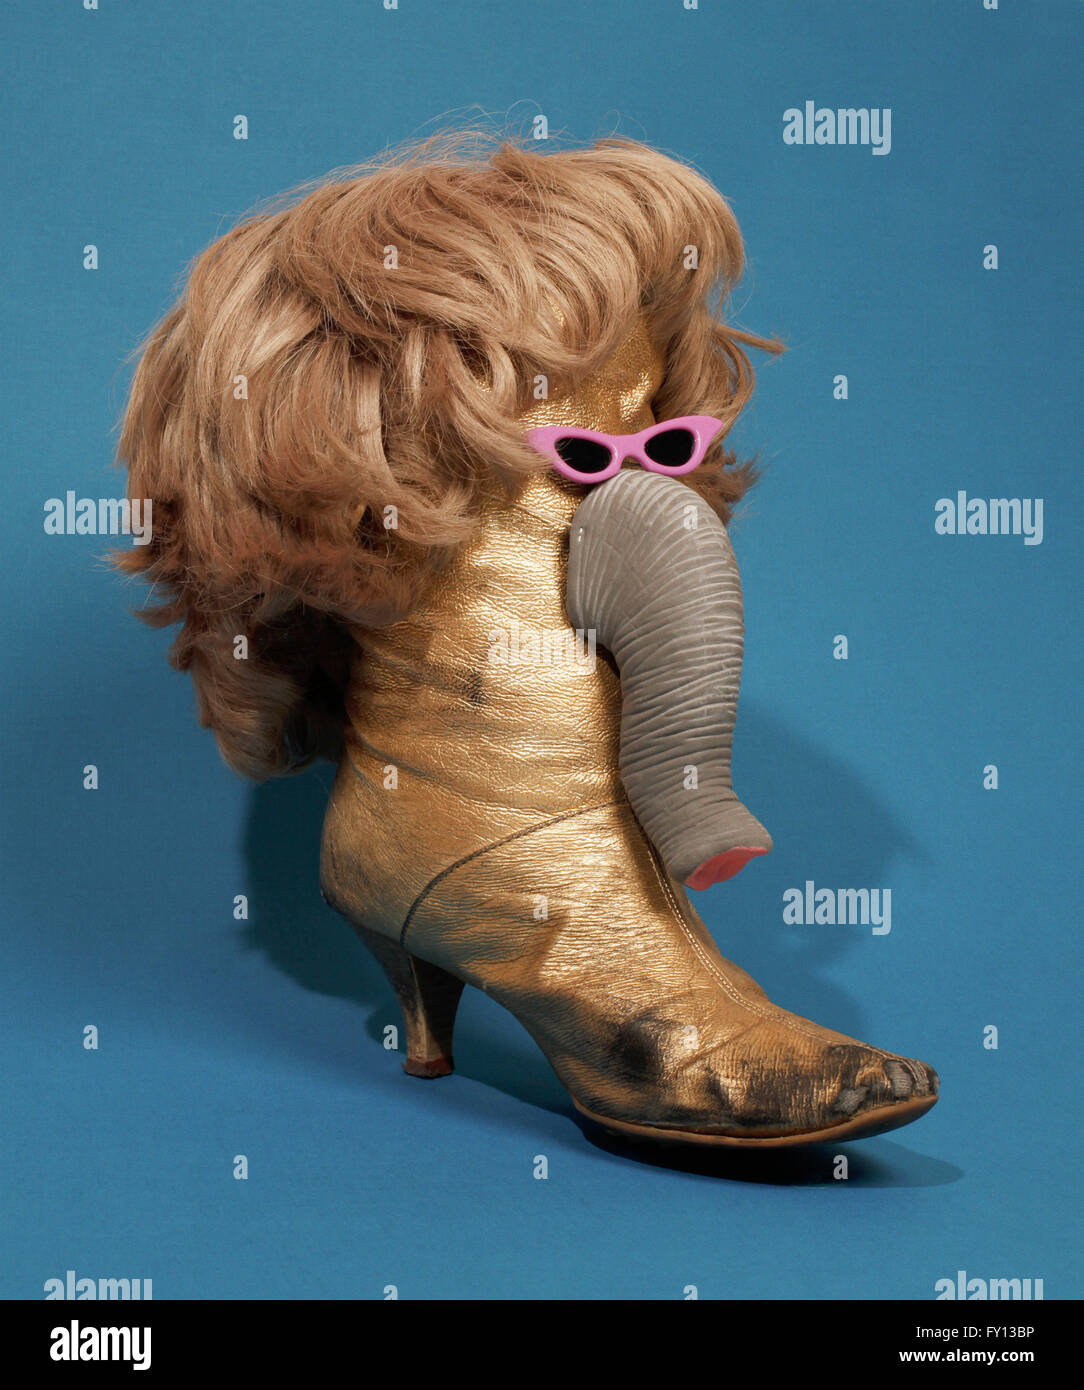 Elephant made from boot and wig over blue background Stock Photo